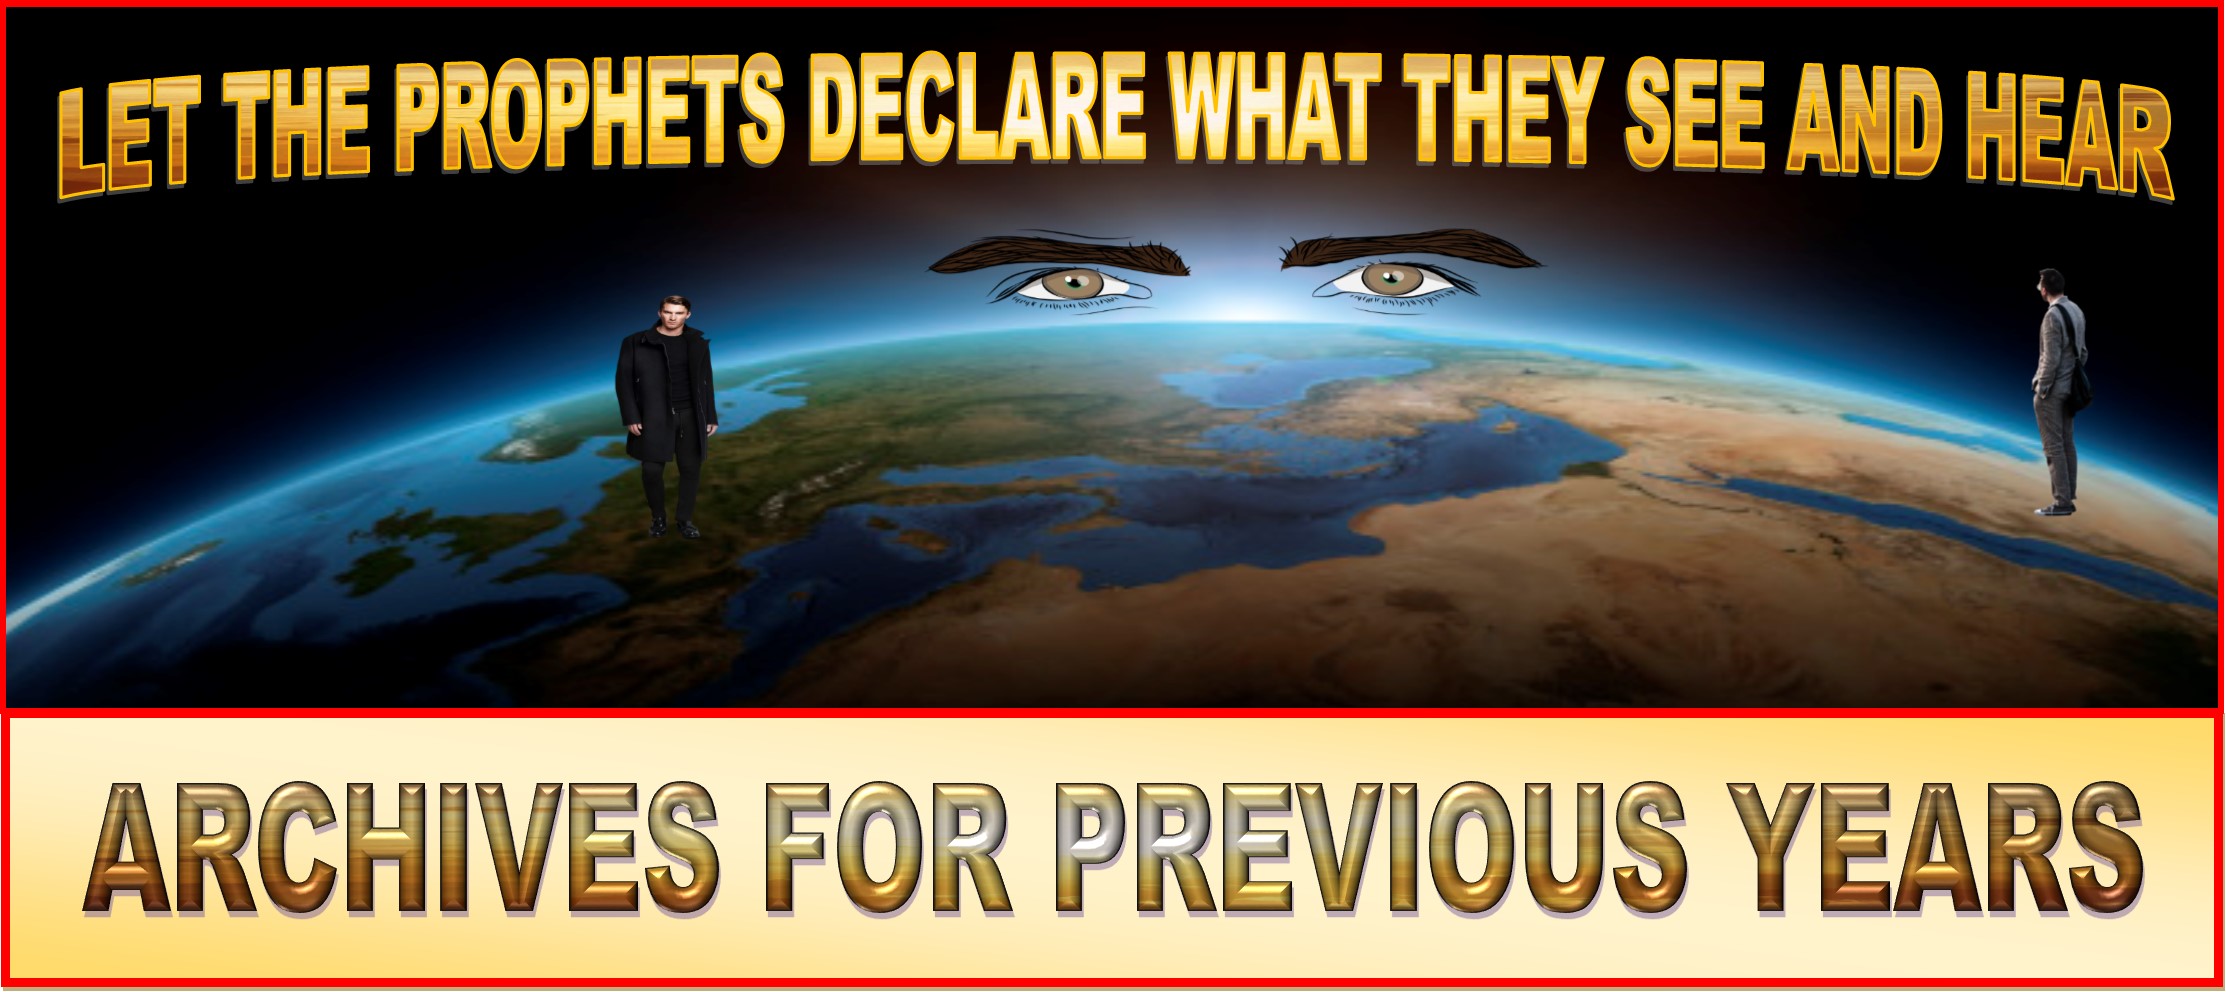 LET THE PROPHETS DECLARE WHAT THEY SEE AND HEAR ARCHIVES FOR PREVIOUS YEARS HEADER AS OF 2-21-2021